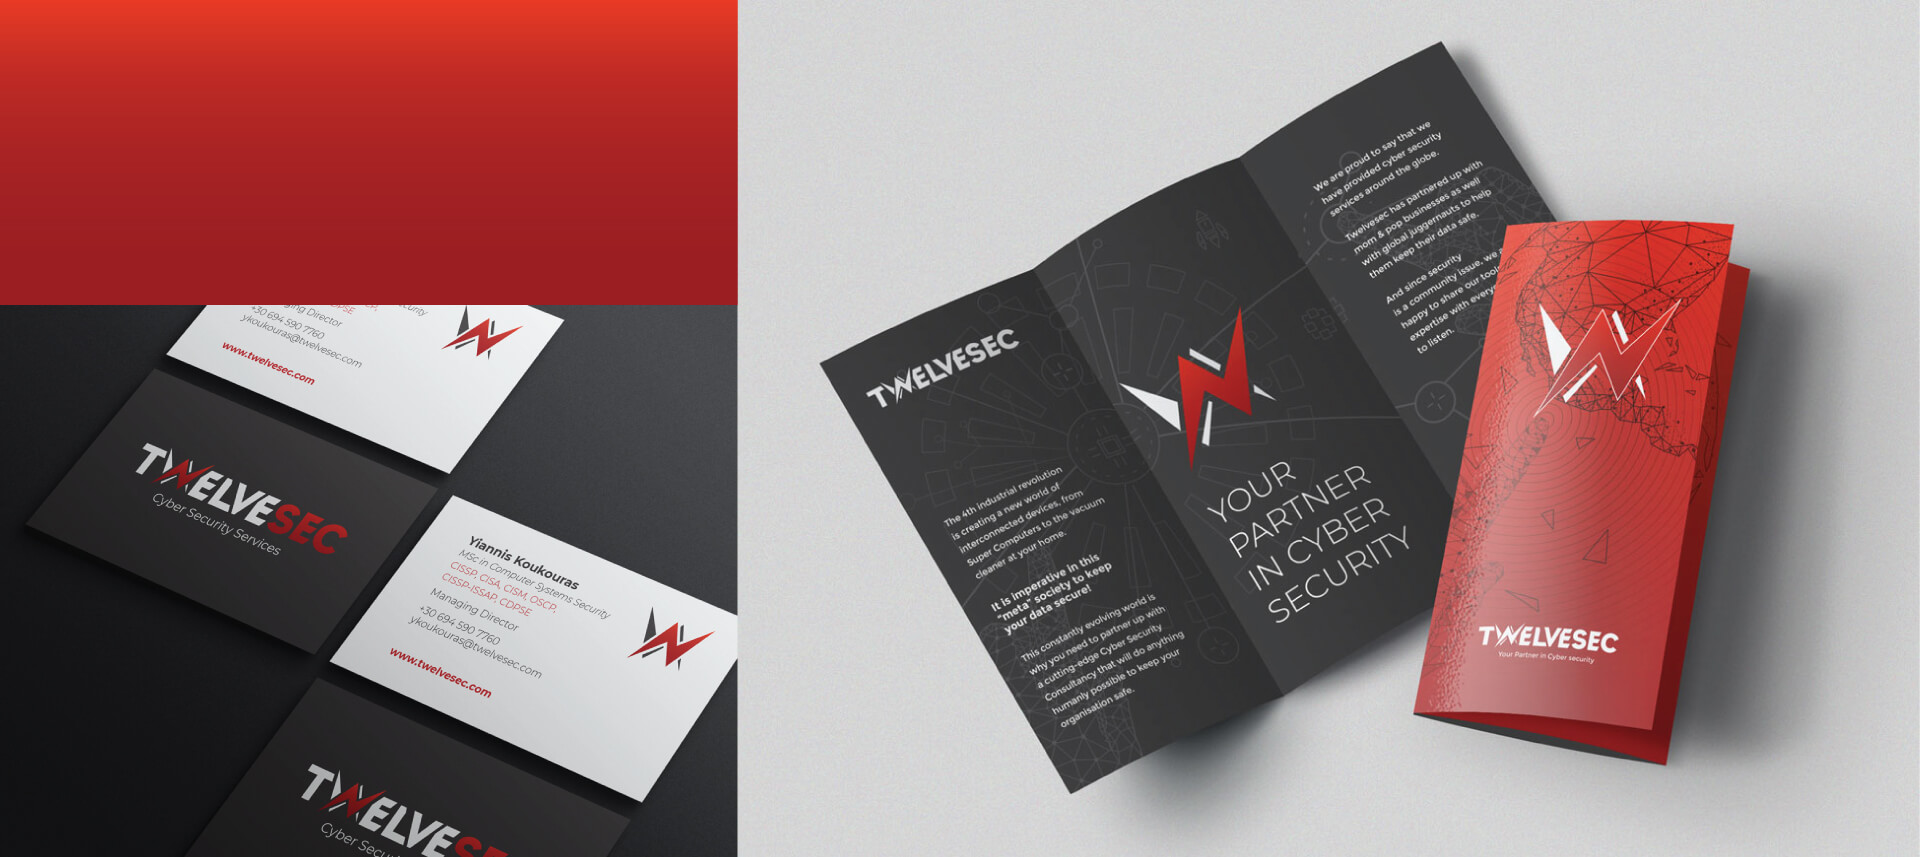 Twelvesec Business Cards & Trifold